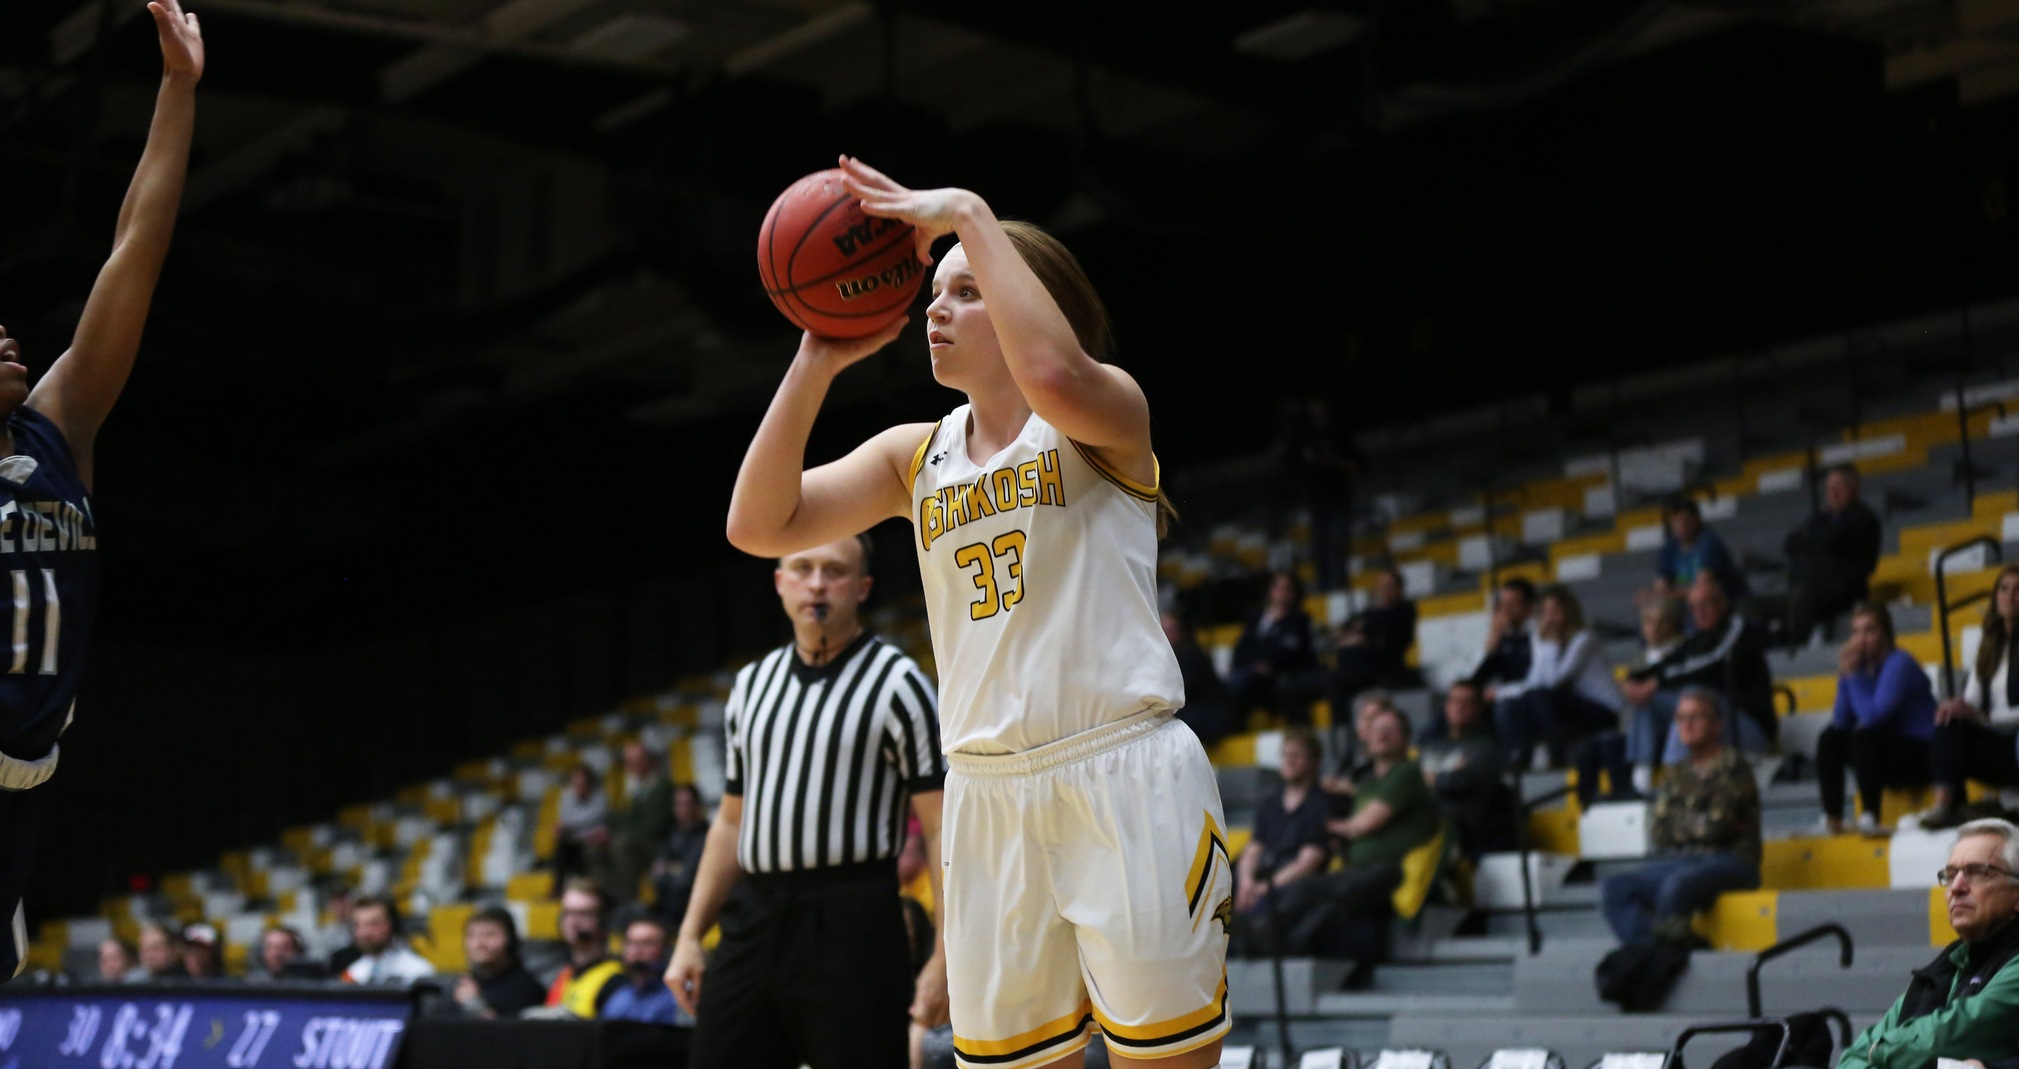 Nikki Arneson totaled 29 points against the Blue Devils by making 9 of 13 shots from the field and 9 of 11 free throws.